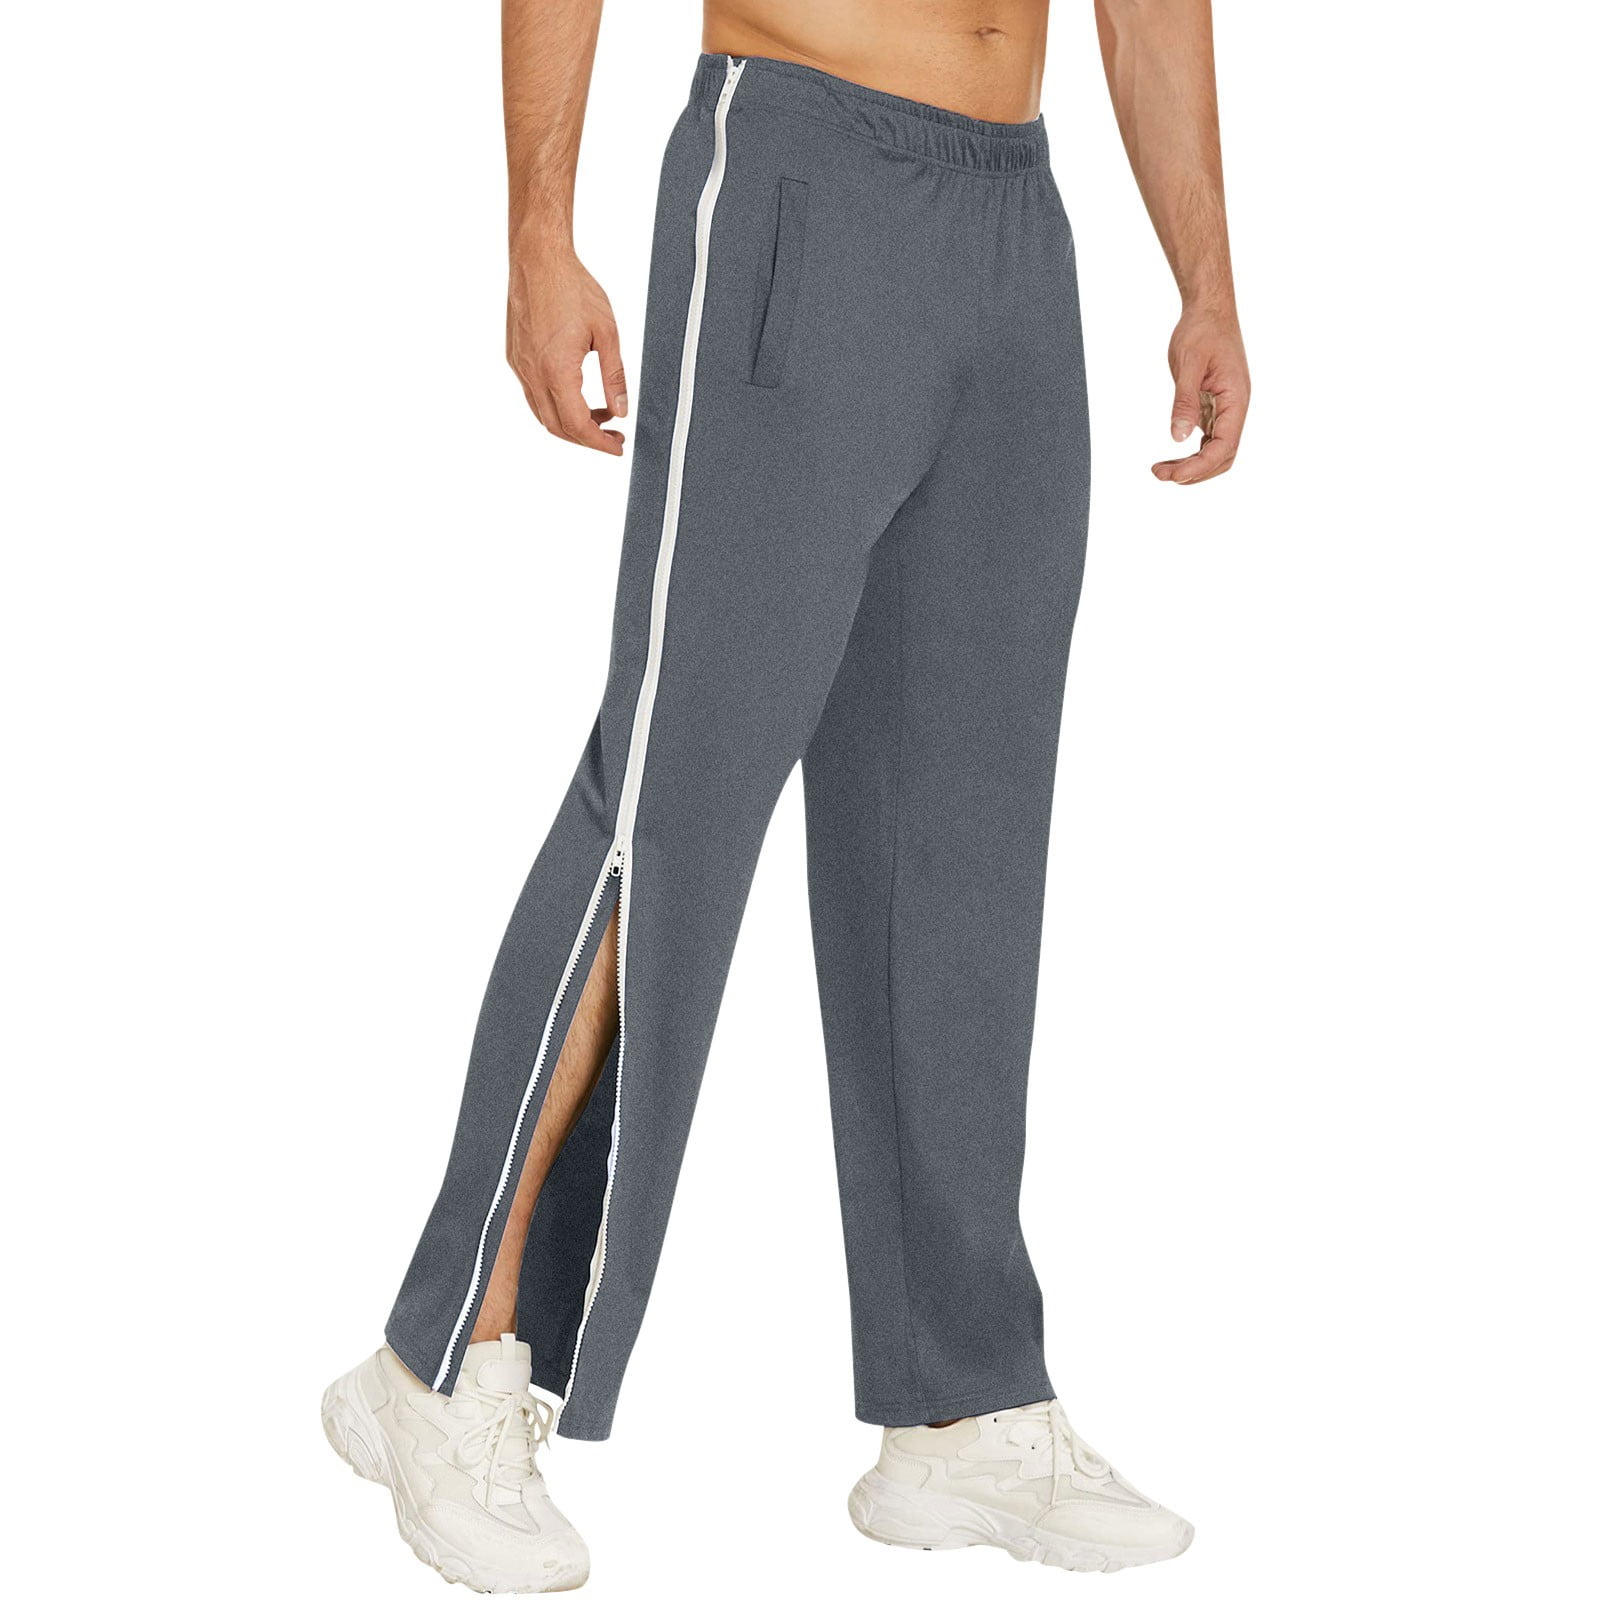 Hottie Must Have! OTEMRCLOC Men Sports Jogger Pants with Side Zipper ...